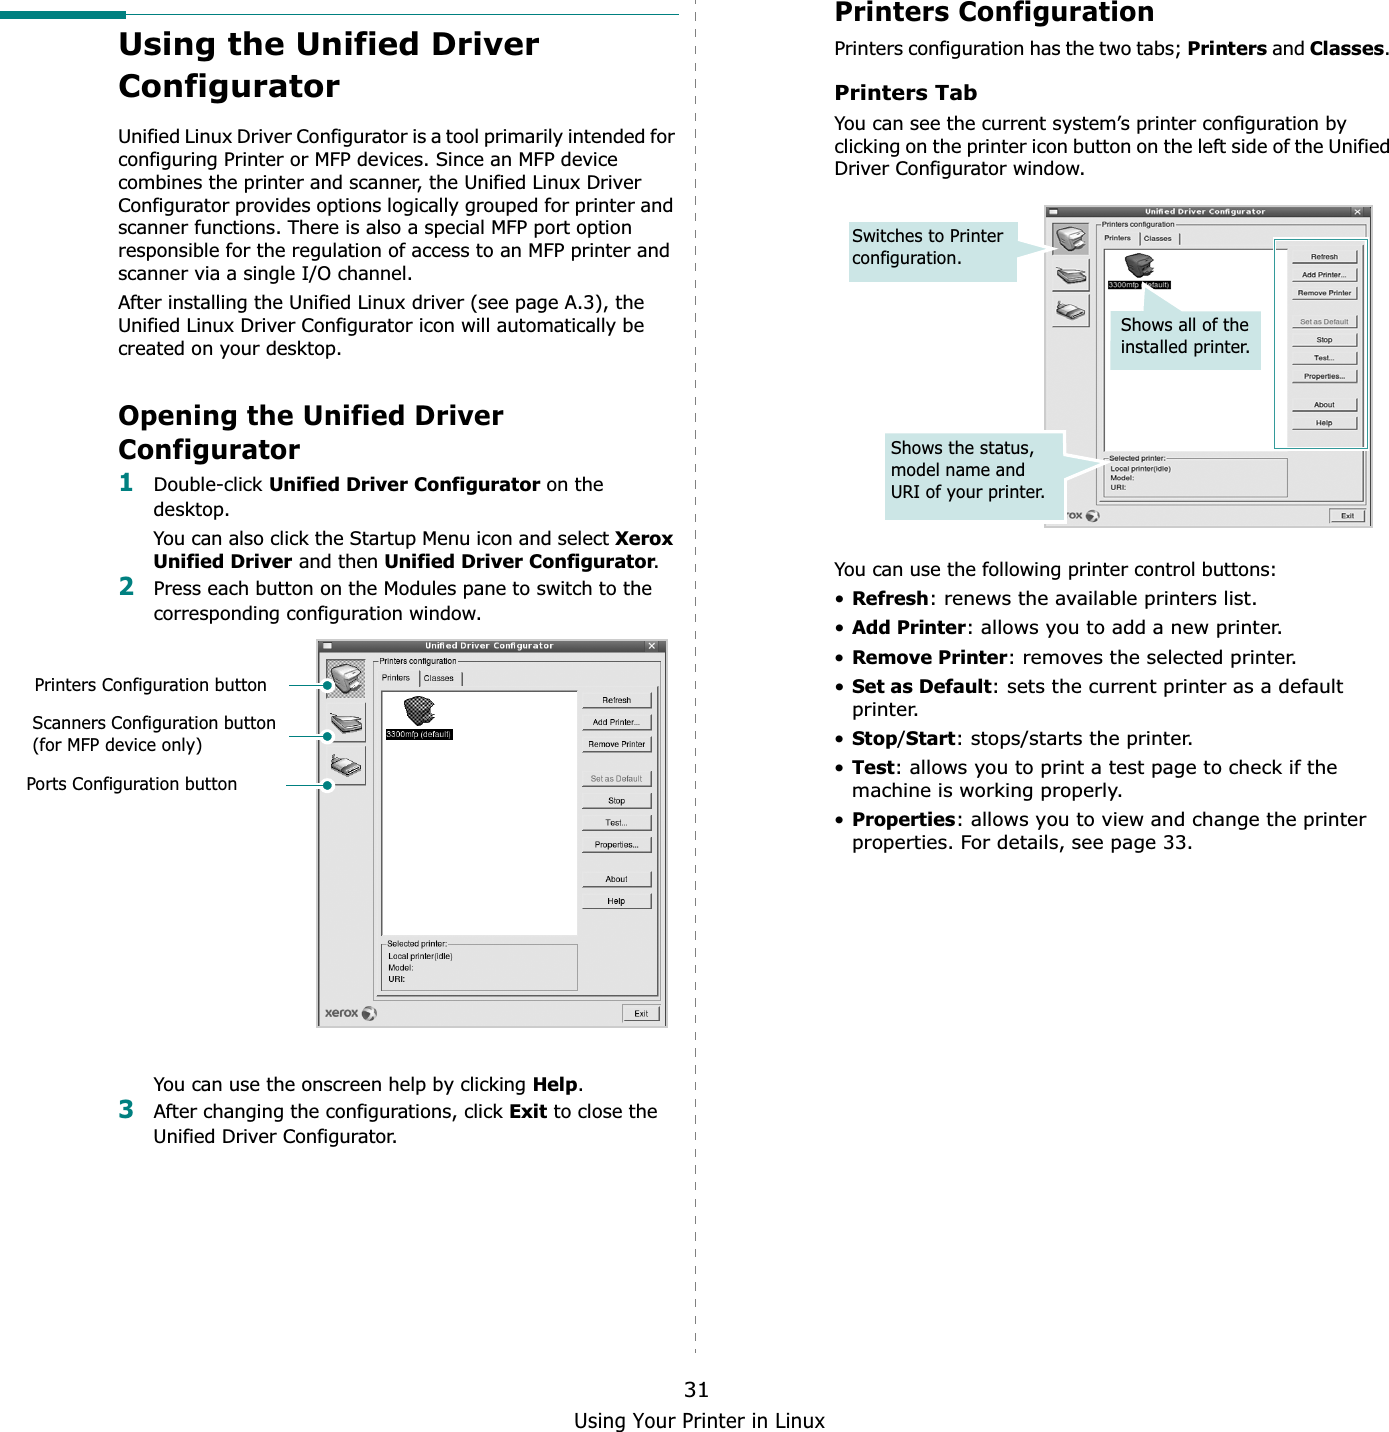 Using Your Printer in Linux31Using the Unified Driver ConfiguratorUnified Linux Driver Configurator is a tool primarily intended for configuring Printer or MFP devices. Since an MFP device combines the printer and scanner, the Unified Linux Driver Configurator provides options logically grouped for printer and scanner functions. There is also a special MFP port option responsible for the regulation of access to an MFP printer and scanner via a single I/O channel.After installing the Unified Linux driver (see page A.3), the Unified Linux Driver Configurator icon will automatically be created on your desktop.Opening the Unified Driver Configurator1Double-click Unified Driver Configurator on the desktop.You can also click the Startup Menu icon and select Xerox Unified Driver and then Unified Driver Configurator.2Press each button on the Modules pane to switch to the corresponding configuration window.You can use the onscreen help by clicking Help.3After changing the configurations, click Exit to close the Unified Driver Configurator.Printers Configuration buttonScanners Configuration button (for MFP device only)Ports Configuration buttonPrinters ConfigurationPrinters configuration has the two tabs; Printers and Classes.Printers TabYou can see the current system’s printer configuration by clicking on the printer icon button on the left side of the Unified Driver Configurator window.You can use the following printer control buttons:•Refresh: renews the available printers list.•Add Printer: allows you to add a new printer.•Remove Printer: removes the selected printer.•Set as Default: sets the current printer as a default printer.•Stop/Start: stops/starts the printer.•Test: allows you to print a test page to check if the machine is working properly.•Properties: allows you to view and change the printer properties. For details, see page 33.Shows all of the installed printer.Switches to Printer configuration.Shows the status, model name and URI of your printer.